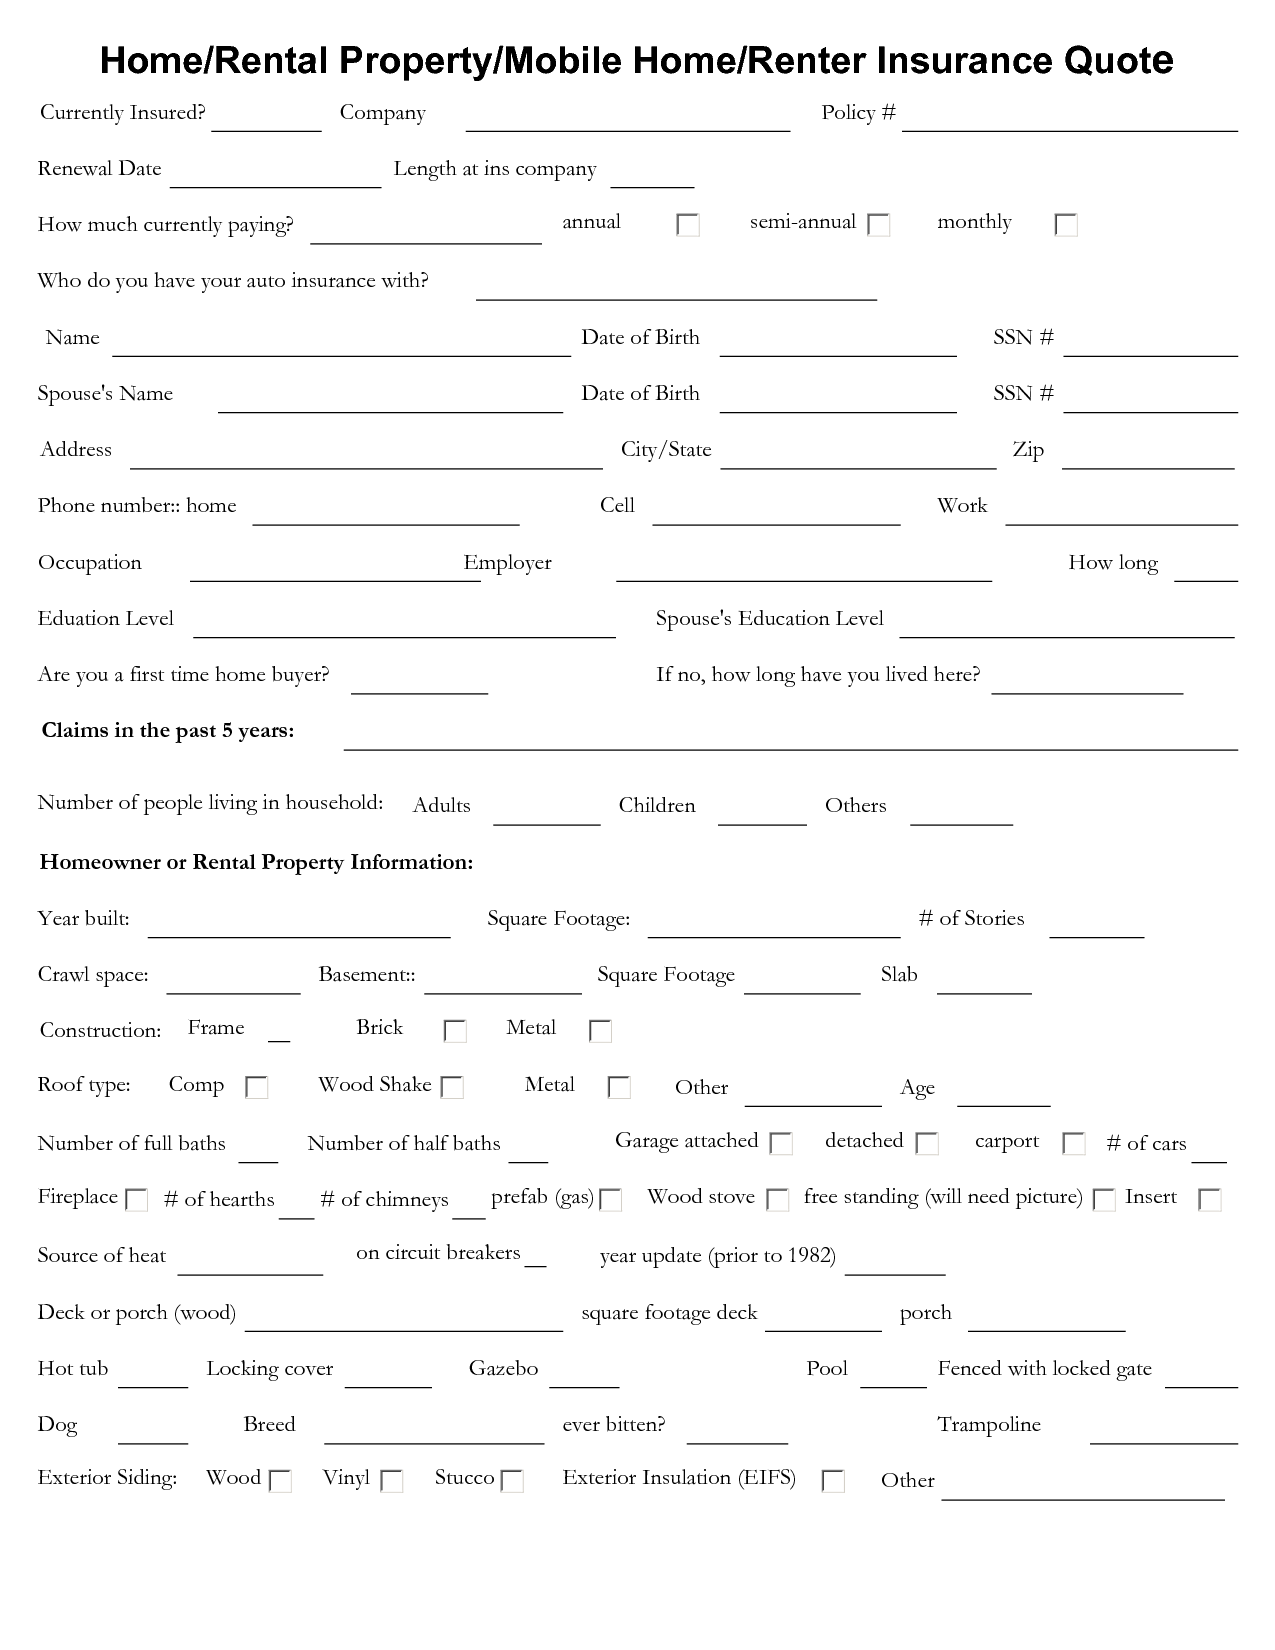 Homeowners Insurance Quote Form Pdf